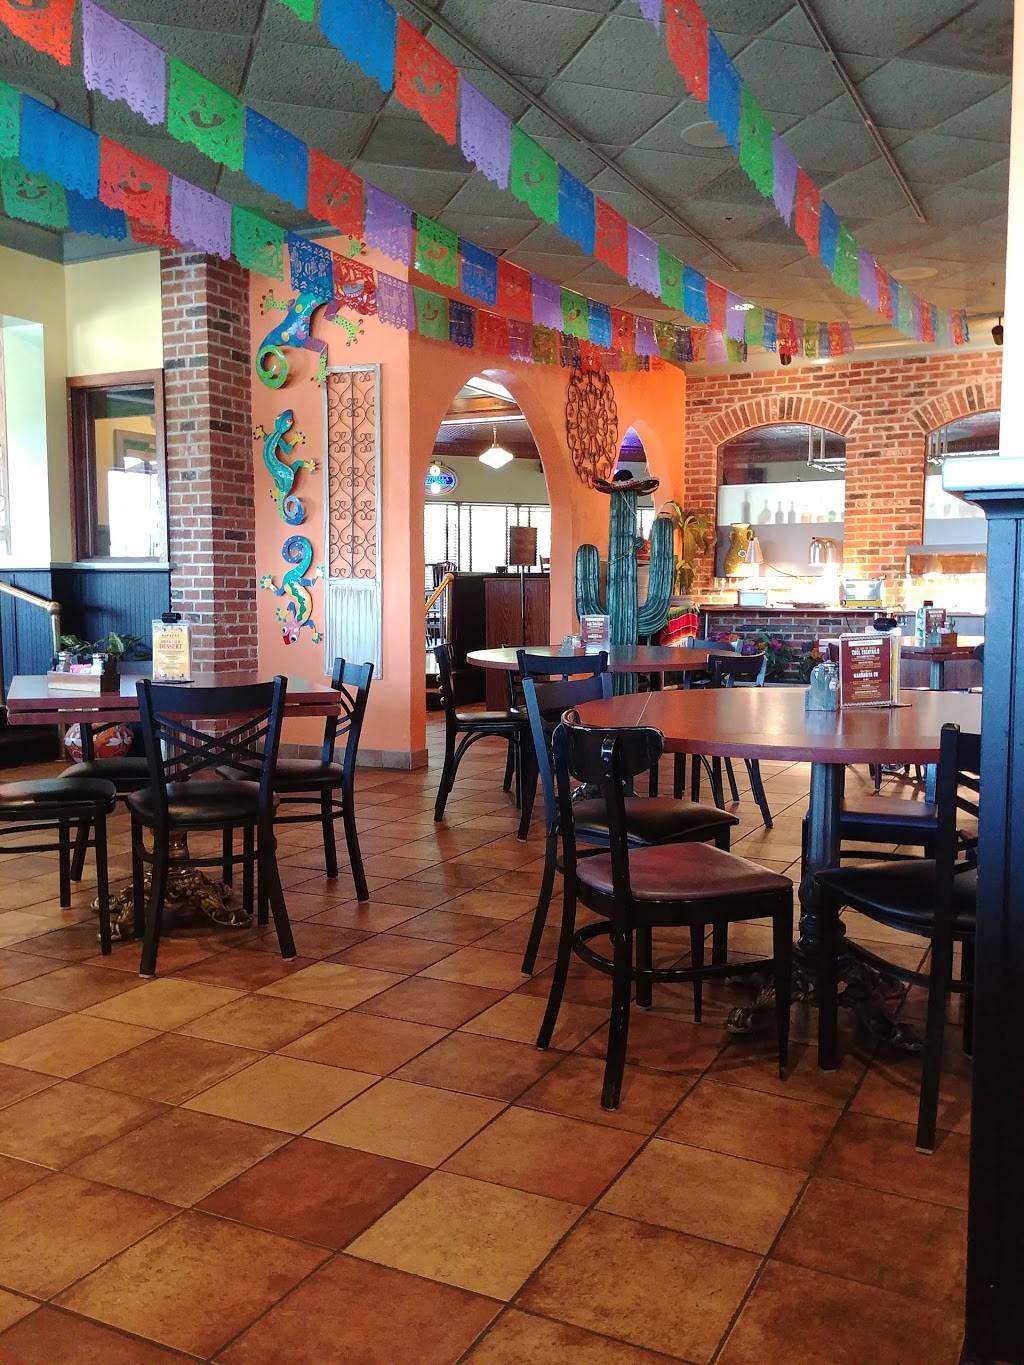 Zapatas Mexican Restaurant | restaurant | 4660 N Illinois St, Fairview Heights, IL 62208, USA | 6182775474 OR +1 618-277-5474